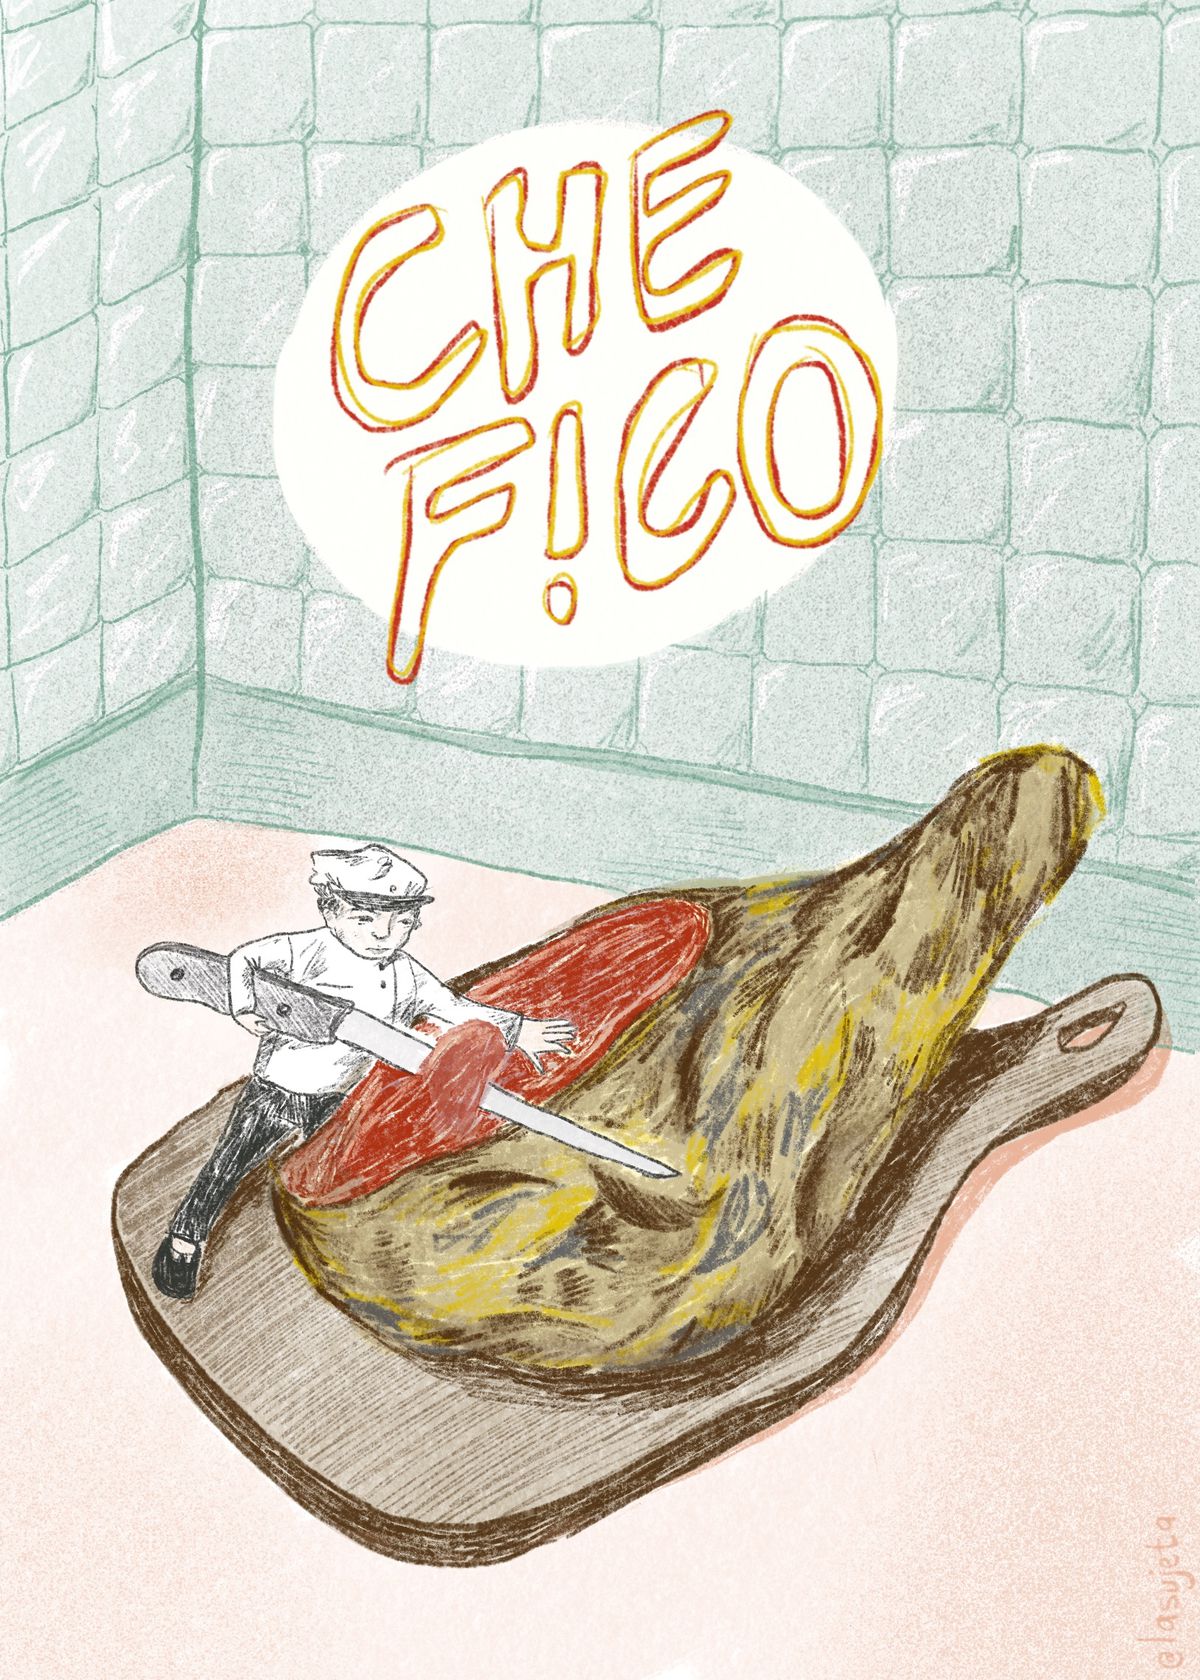 A color pencil illustration of a miniature boy standing on a full-size cutting board and slicing into a prosciutto leg with a knife. Light blue tile covers the background and the restaurant’s name, “Che Fico,” with the “I” upside-down, is drawn in red pencil inside a white bubble.